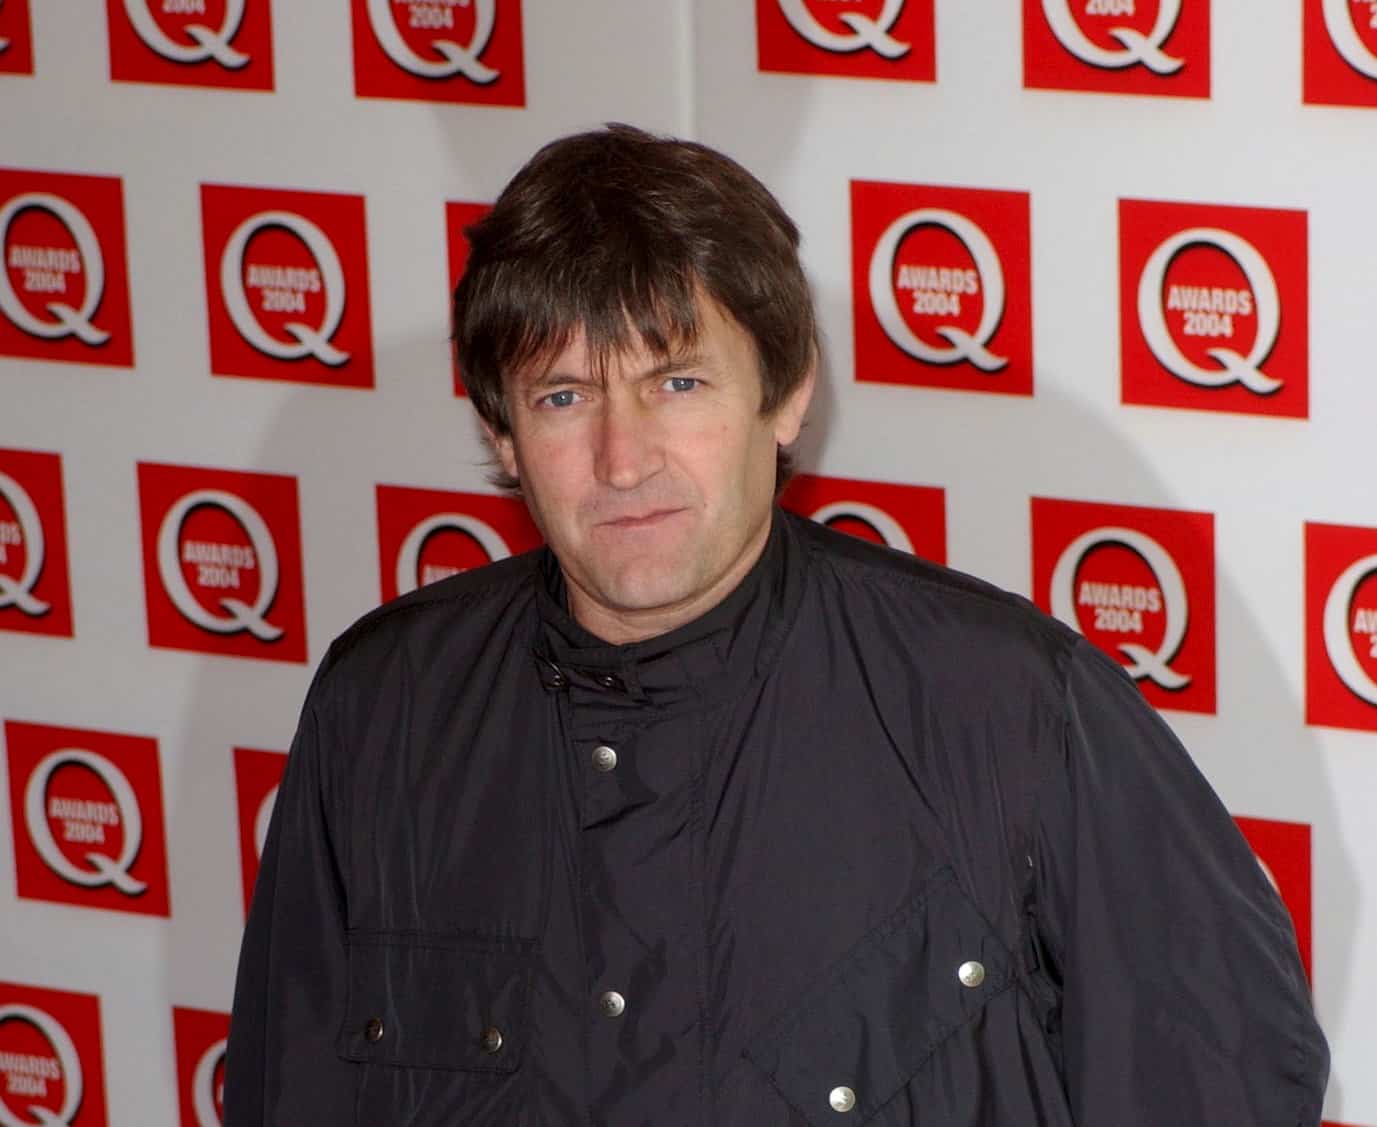 Singer Paul Heaton praised for large donation to Q Magazine staff when publication closed after 34 years